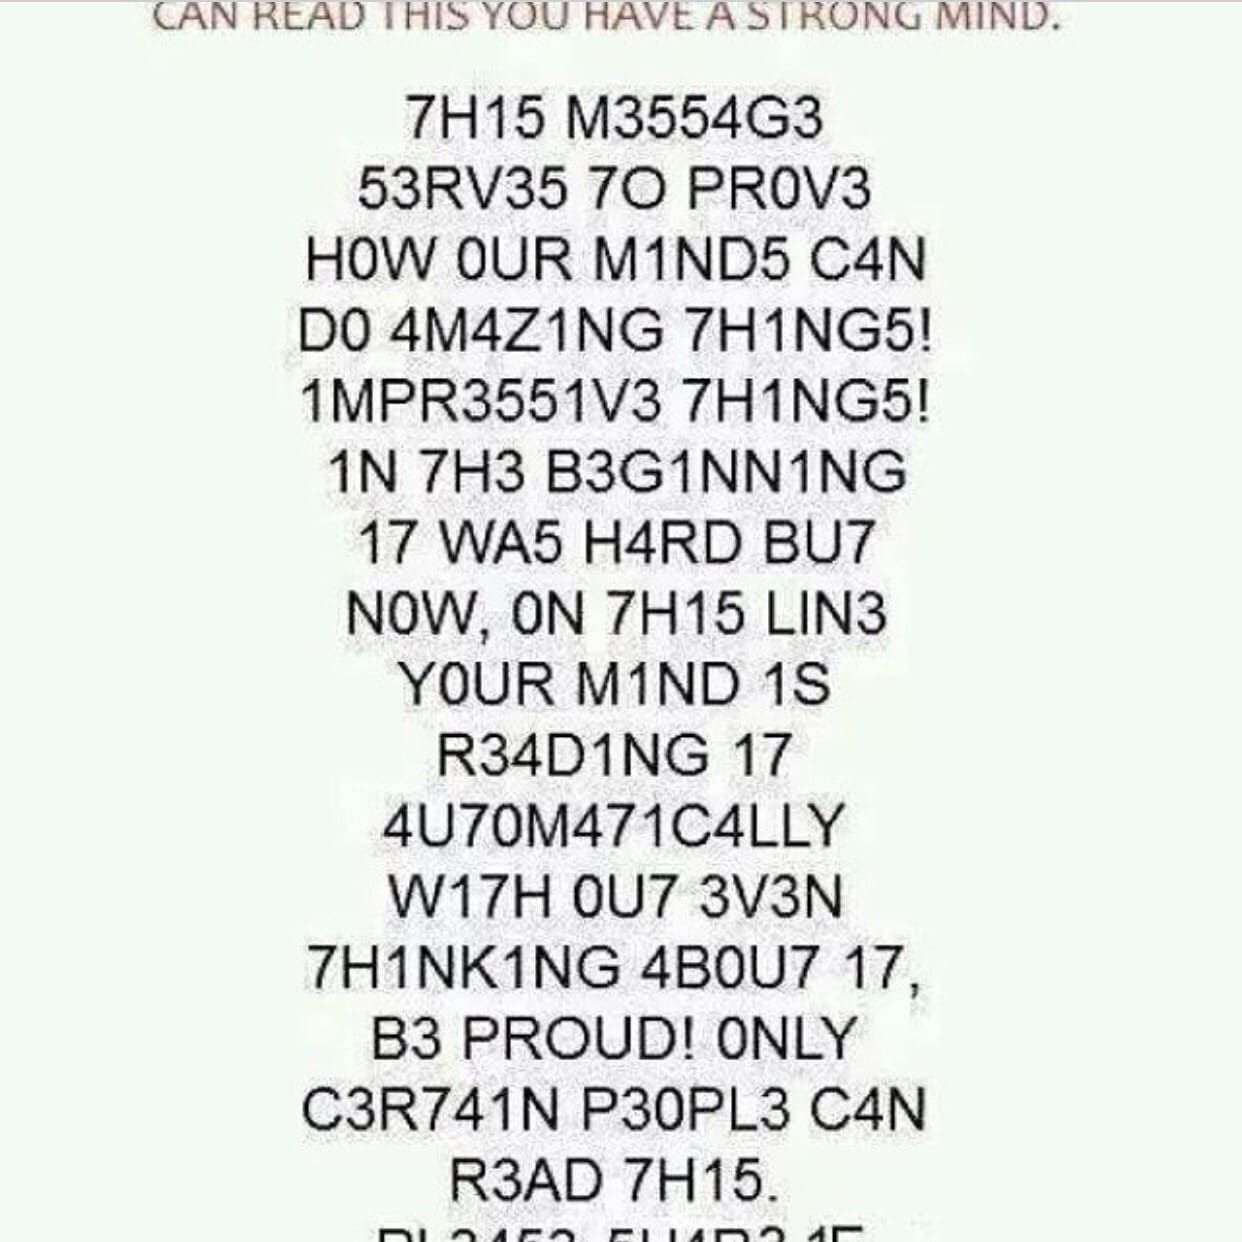 brain can read this without the right spelling subconsciously